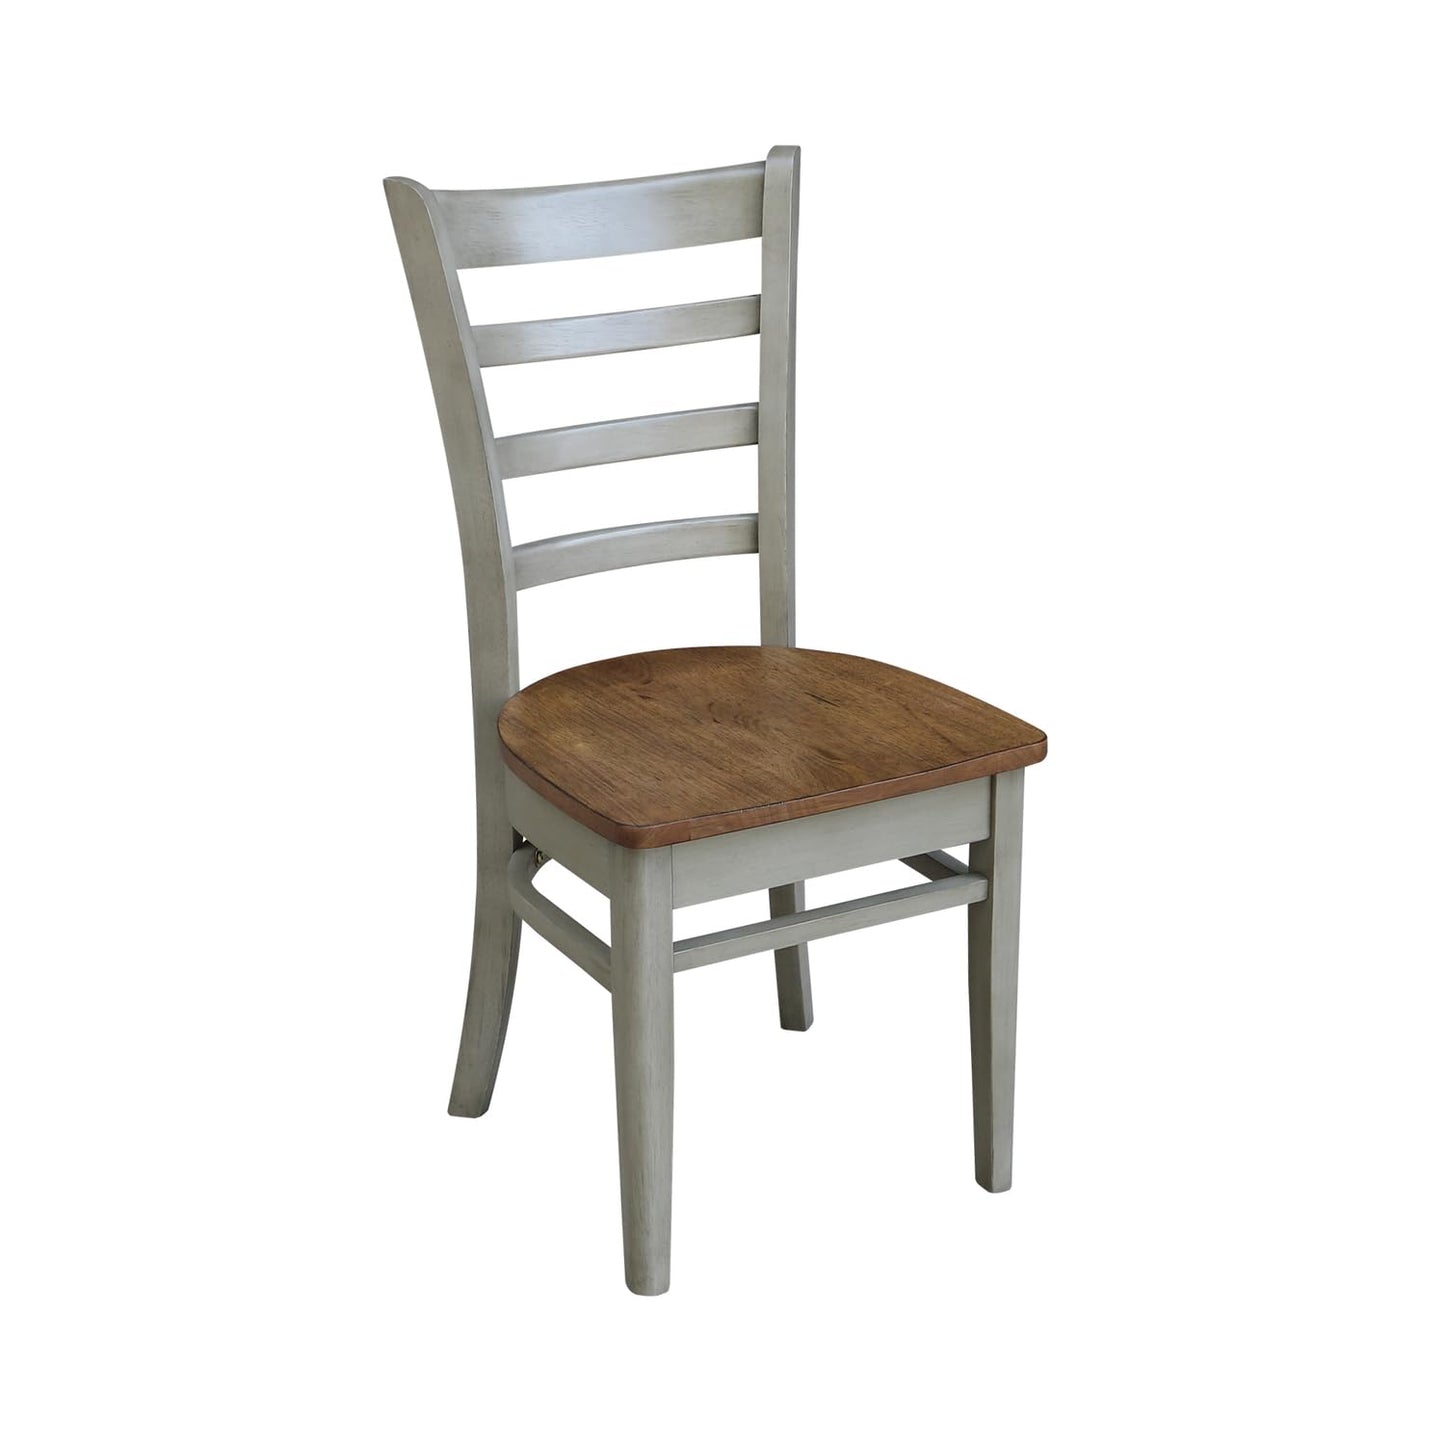 IC International Concepts International Concepts Emily Side, Set of 2 Chair, Distressed Hickory/Stone